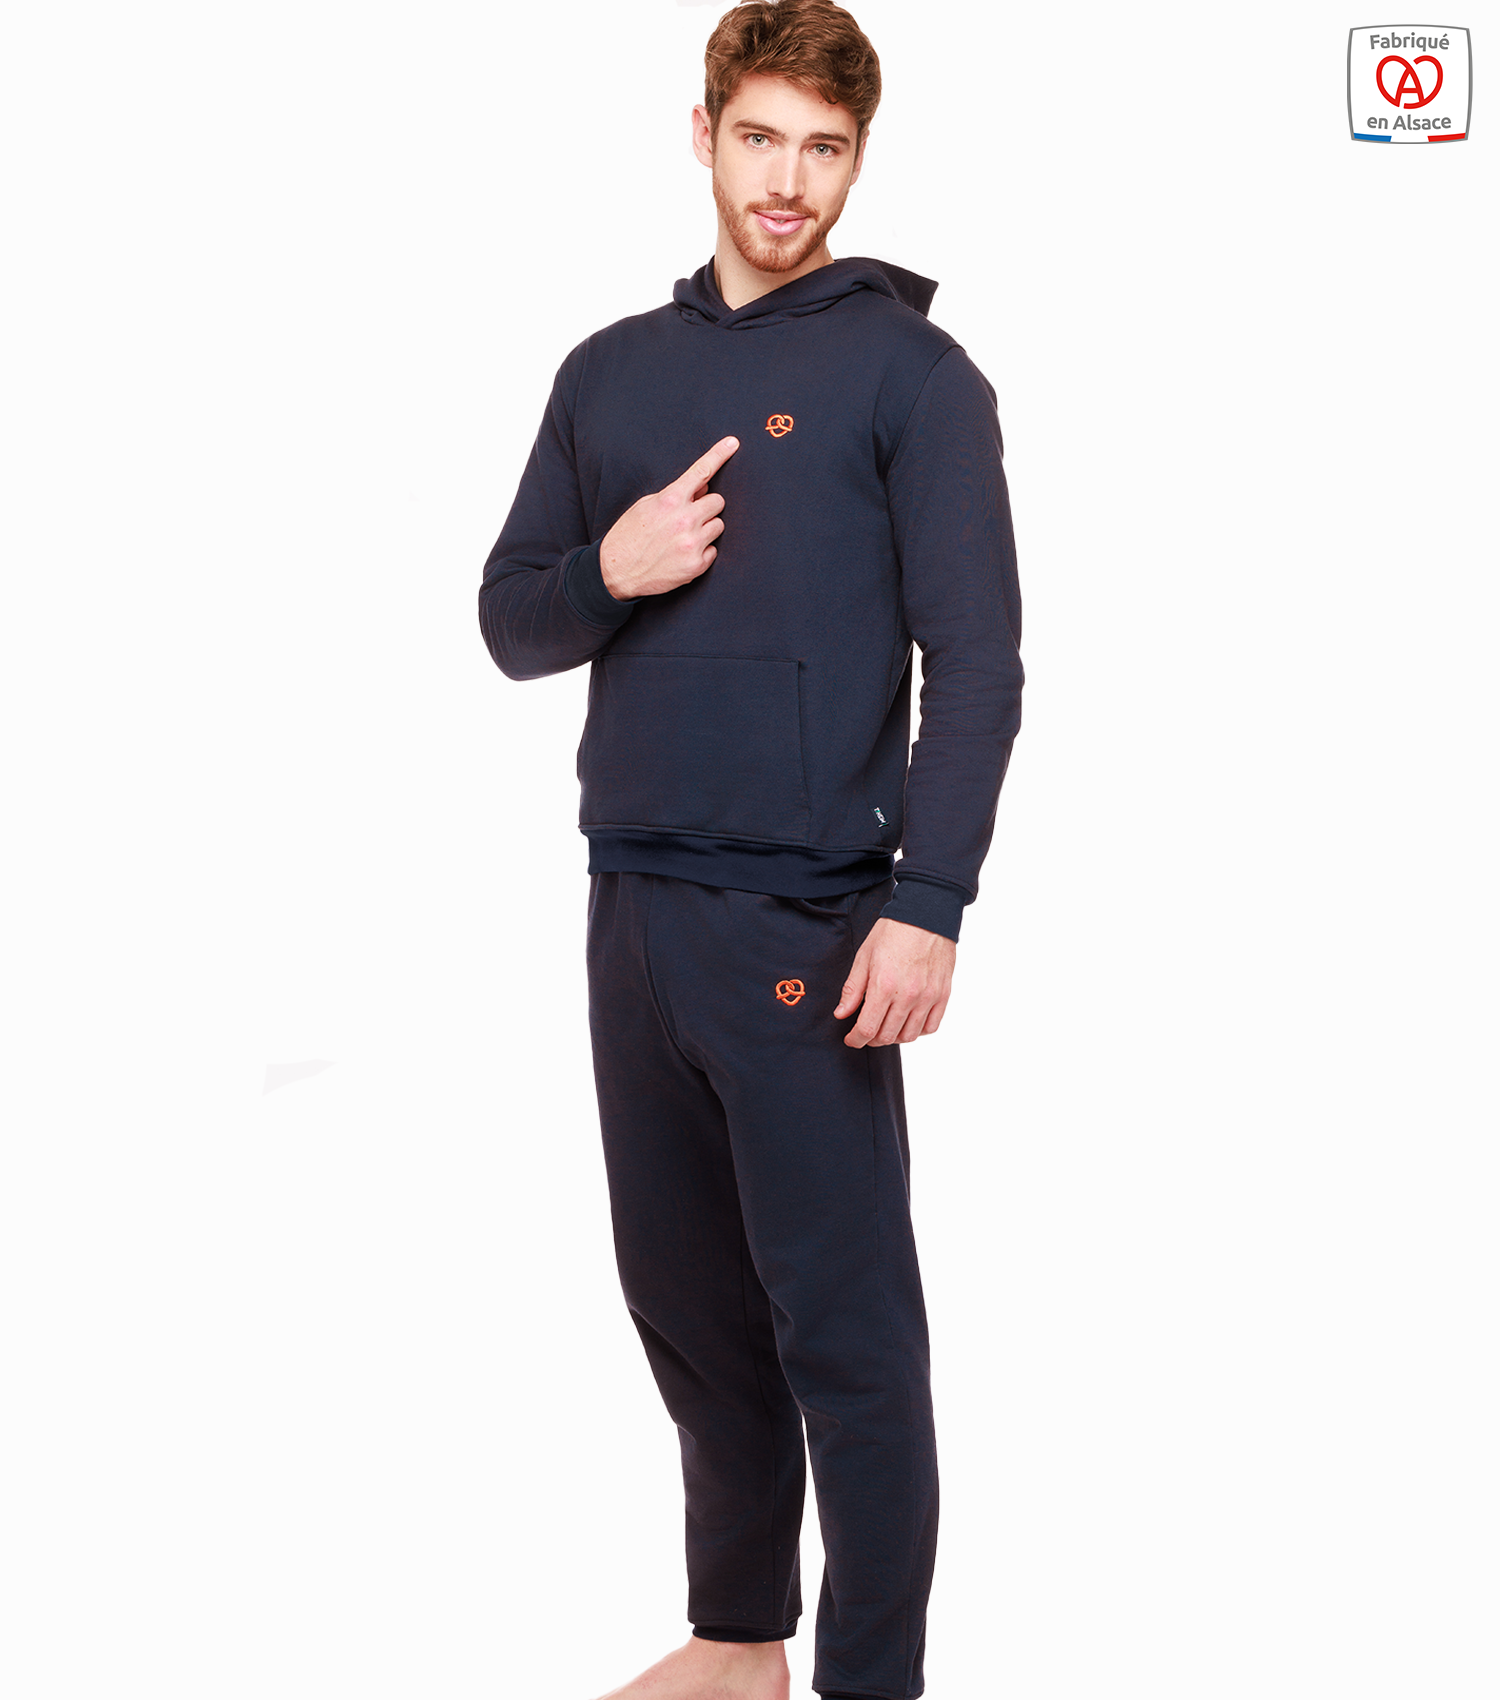 theim-jogging-homme-bretzel-made-in-france-1500-x-1700-px